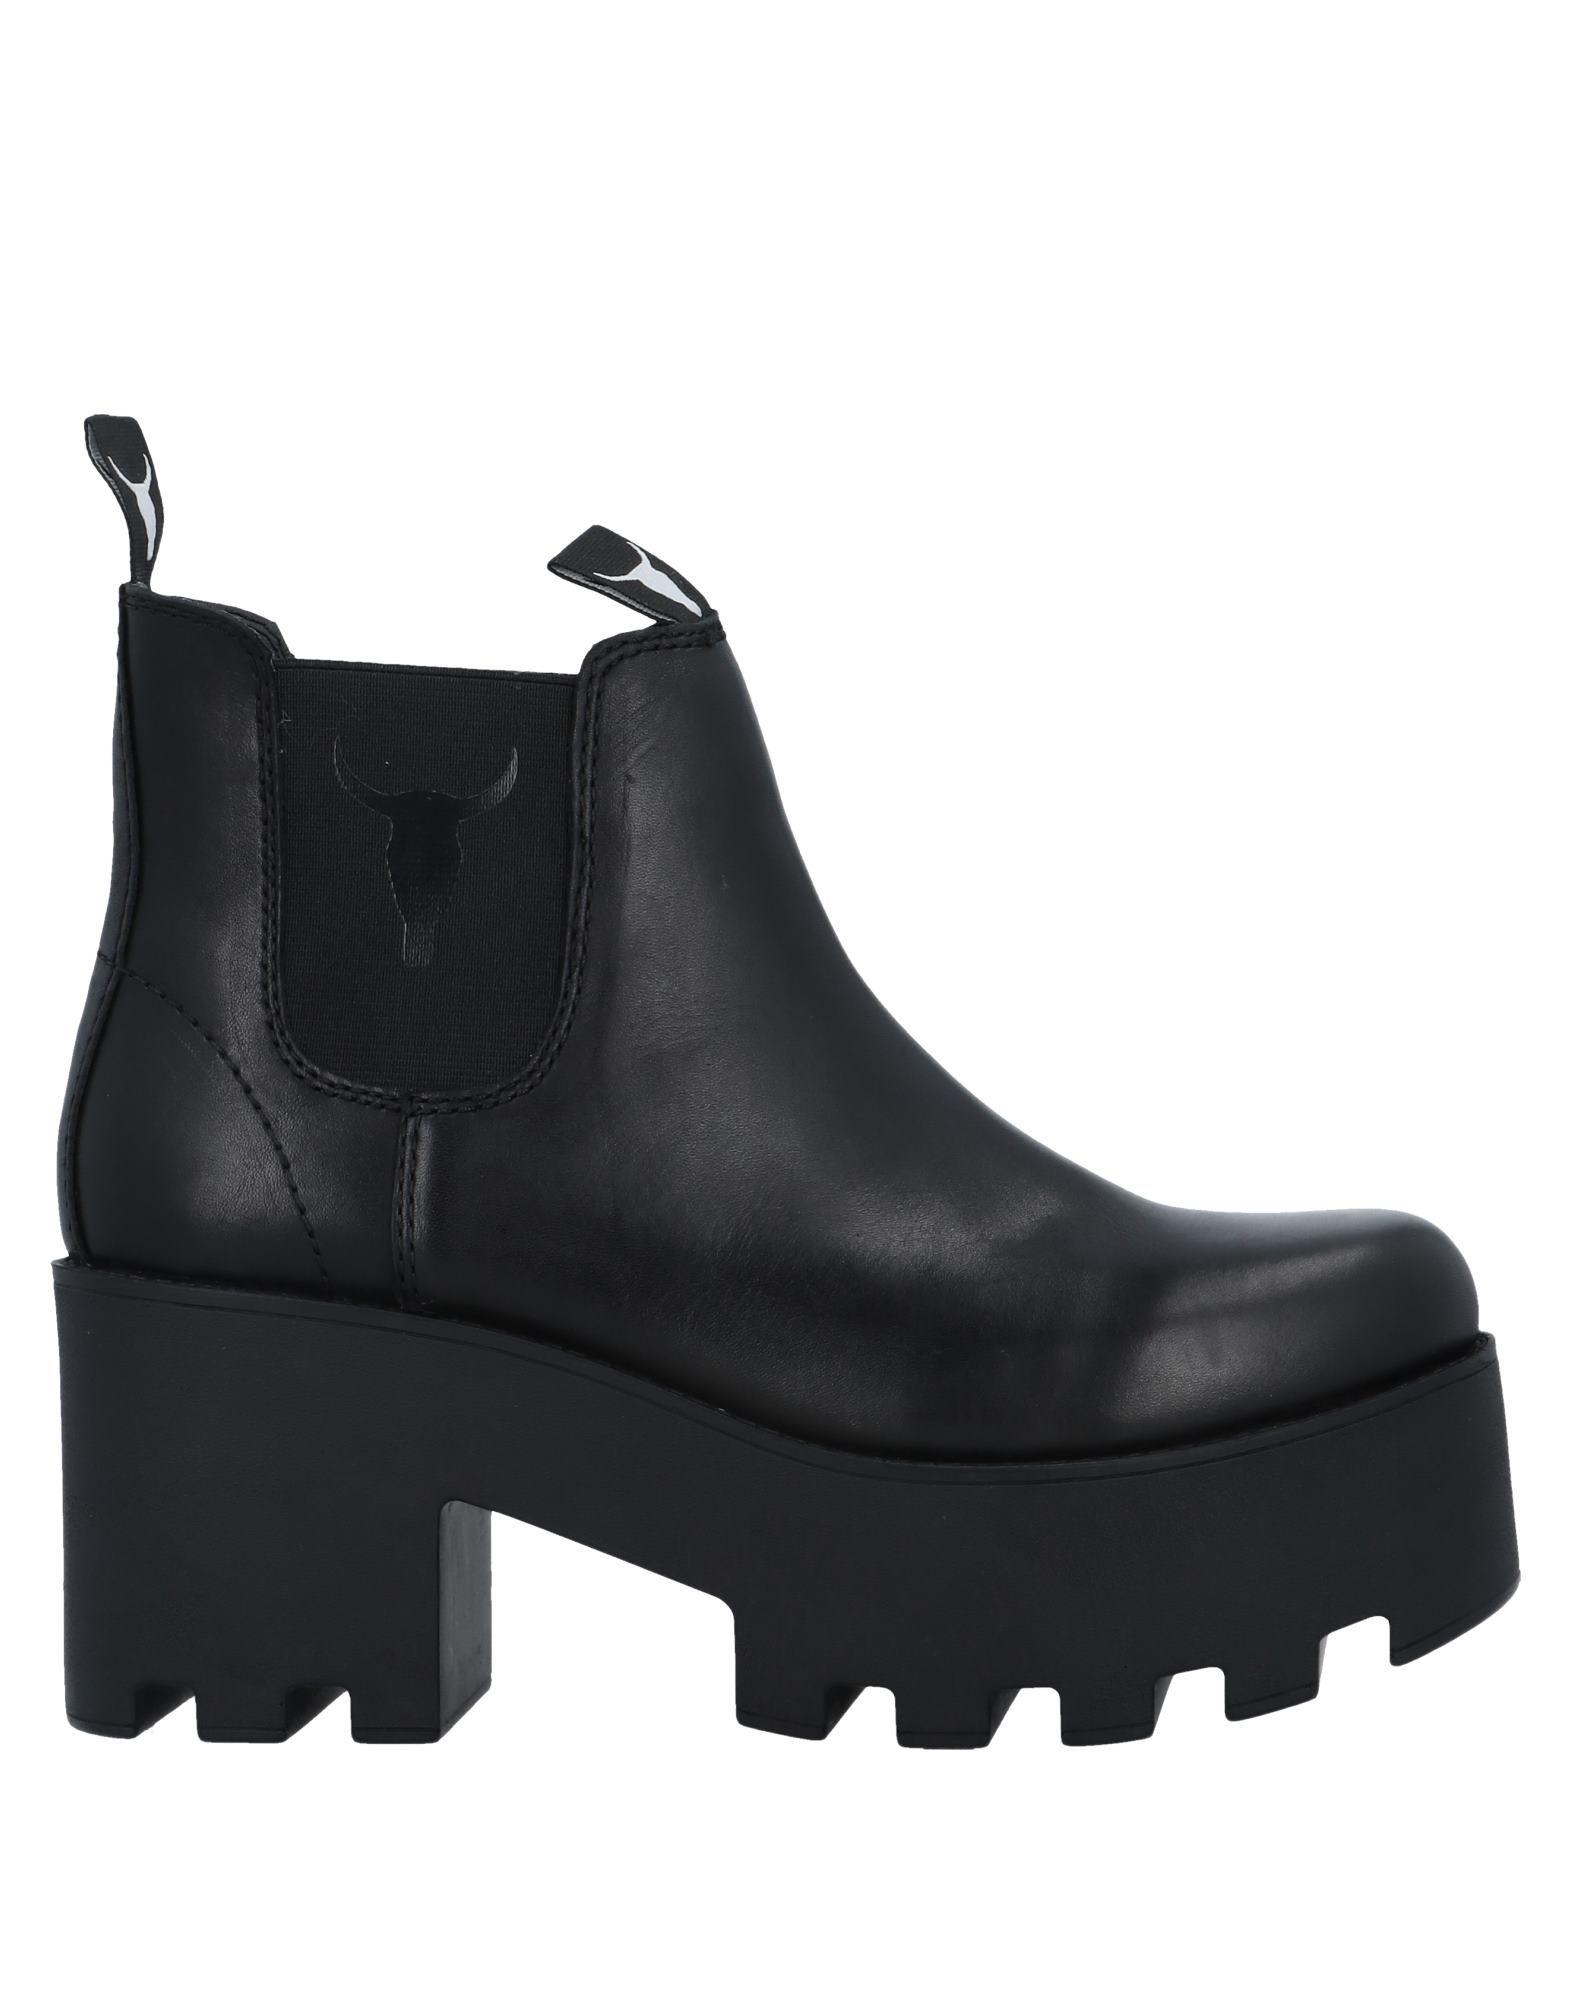 Windsor Smith Leather Ankle Boots in Black - Lyst